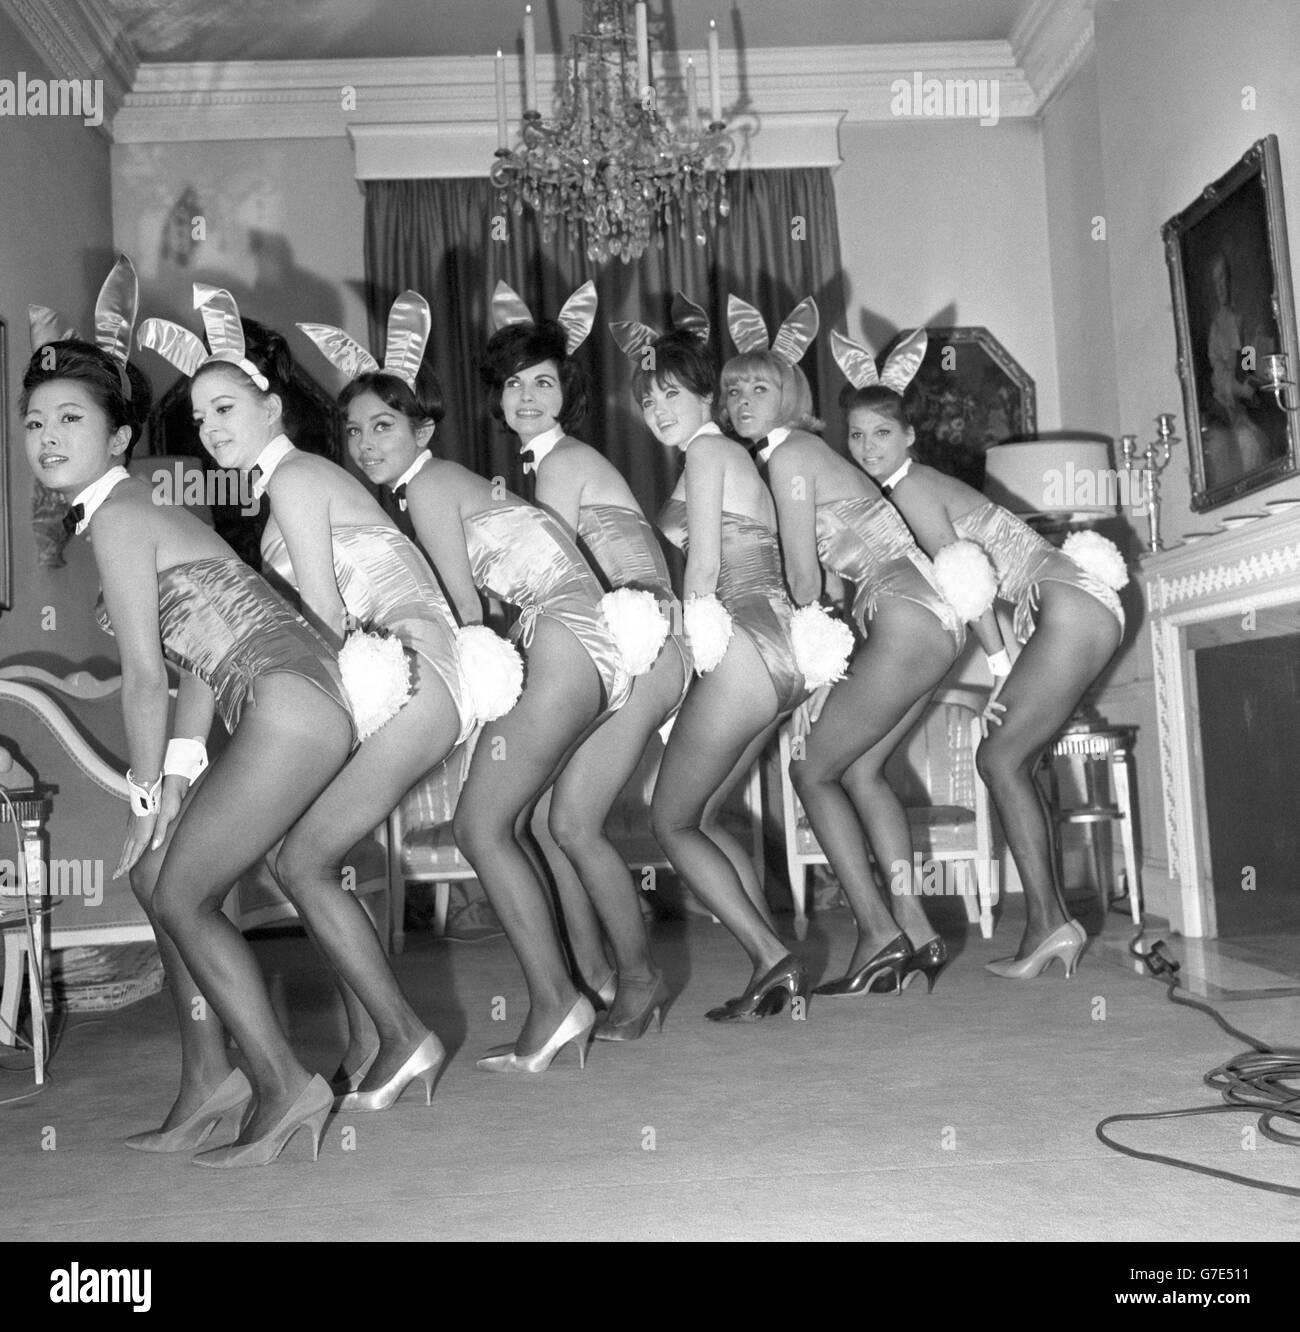 Seven winners of the 'Bunny Award' pose for pictures in London following a visit to Paris. They were chosen from America's Playboy Clubs for their appearance, graciousness and popularity. (l-r) Elizabeth Yee from New York, Penny Payton from Chicago, Katherine Fitzpatrick from Detroit, Martha Louise Hellwig from New Orleans, Doris Karloss from Phoenix, Iris Niedra from Miami and Joyce Chadwick from St. Louis. Stock Photo